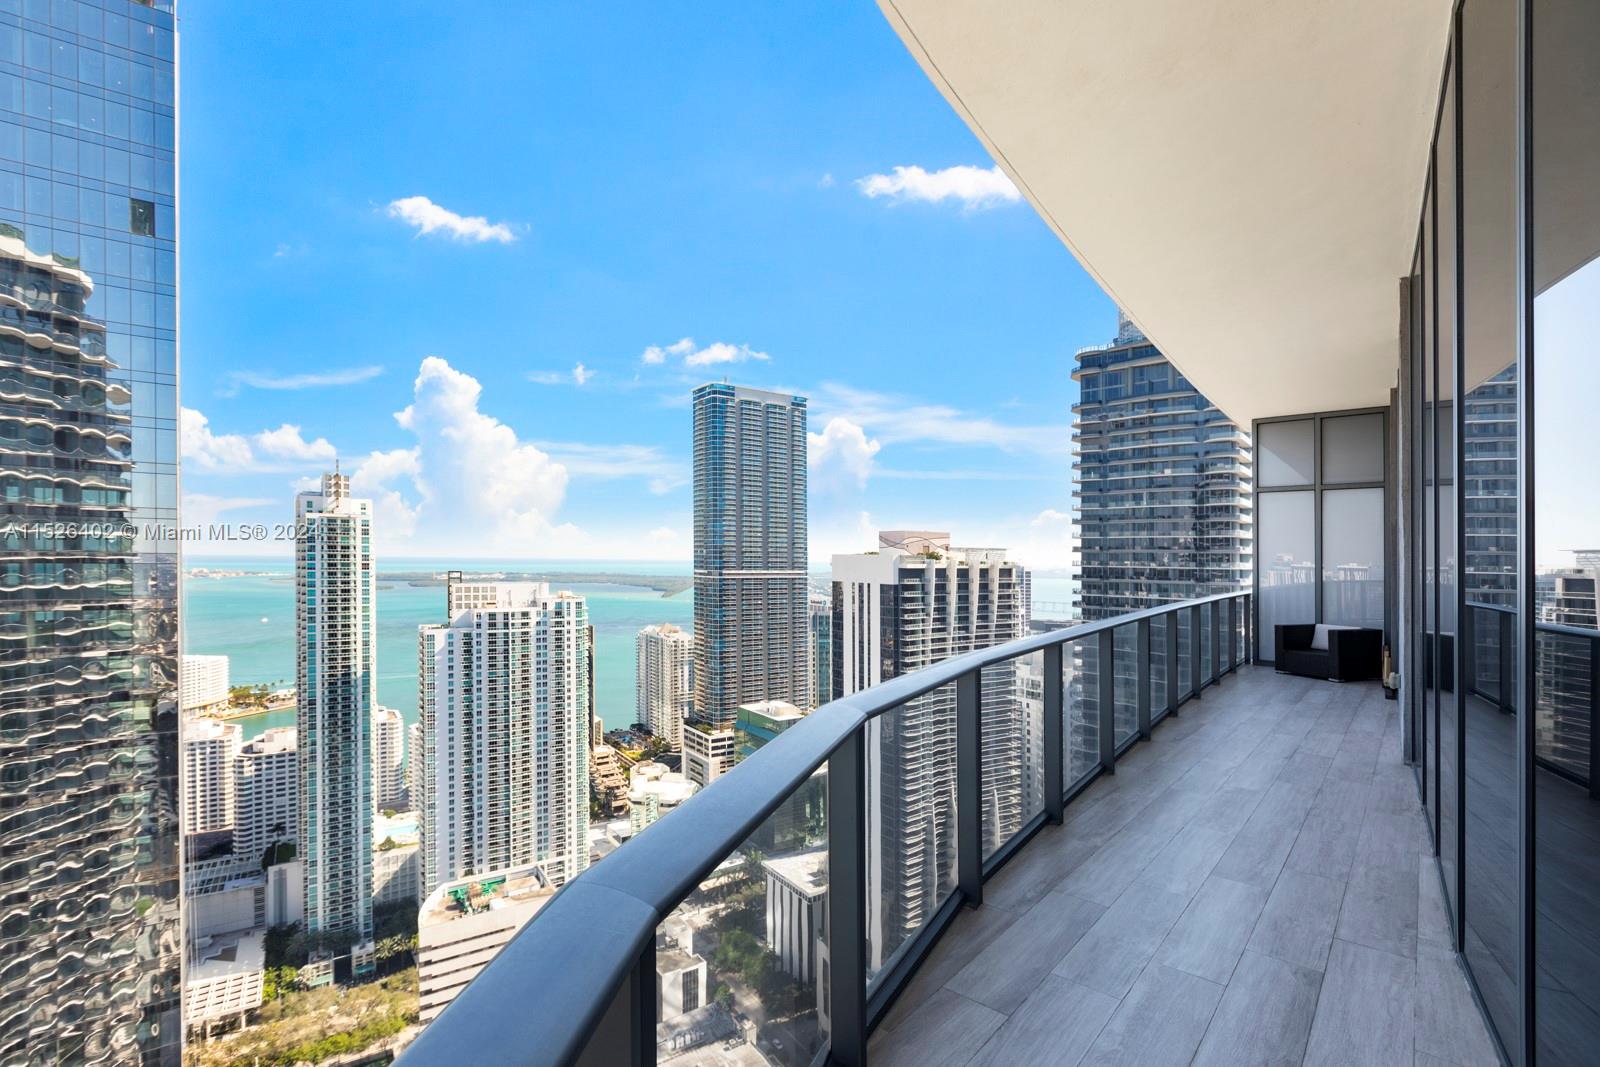 Rare Opportunity to own a large, 4 bed Penthouse in the Brickell Heights condominium. This unit is perfectly laid out & spans over 2,200 sqft, boasting high ceilings (13’), with floor to ceiling windows, which offer spectacular panoramic cityscapes and beautiful water views of Biscayne Bay. The kitchen has been completely updated, including custom cabinetry that extends to the ceilings for additional storage. In addition to the 4 bedrooms and 4.5 bathrooms, the office has been completely built out, perfect for today’s work-from home lifestyle.  The unit comes with one of the buildings few storage units, 3 parking spaces (1 owned, 2&3 leased from HOA). The amenities include 24/7 security & concierge, rooftop pool, spa, gym, etc... Located in the heart of Miami's Brickell neighborhood.